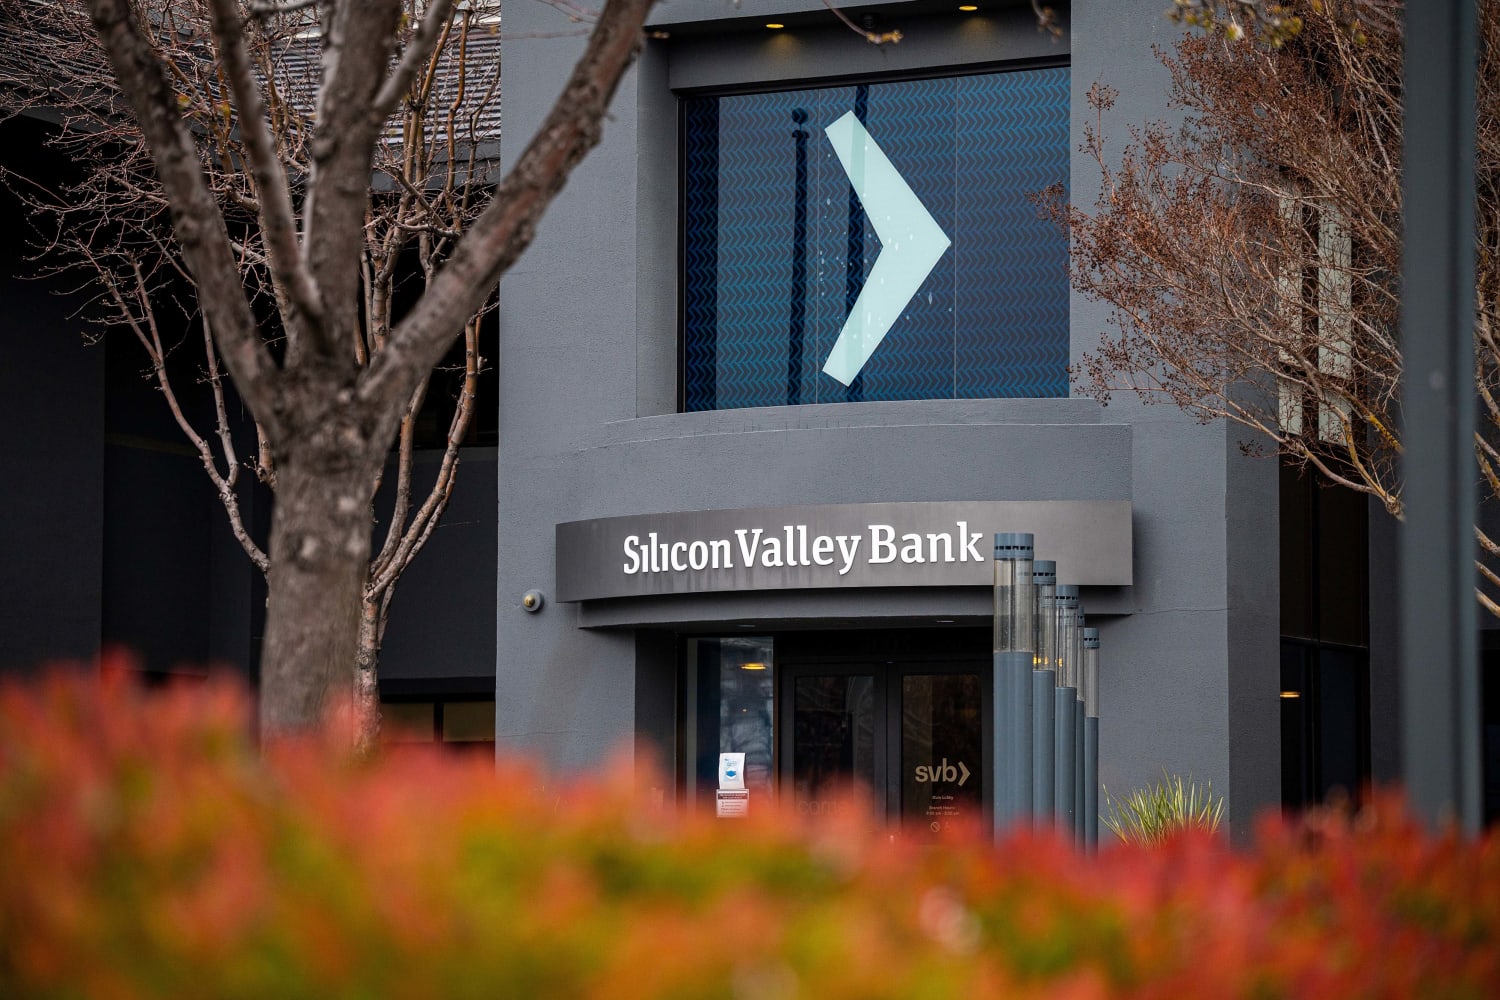 Regulators move to protect all deposits at Silicon Valley Bank